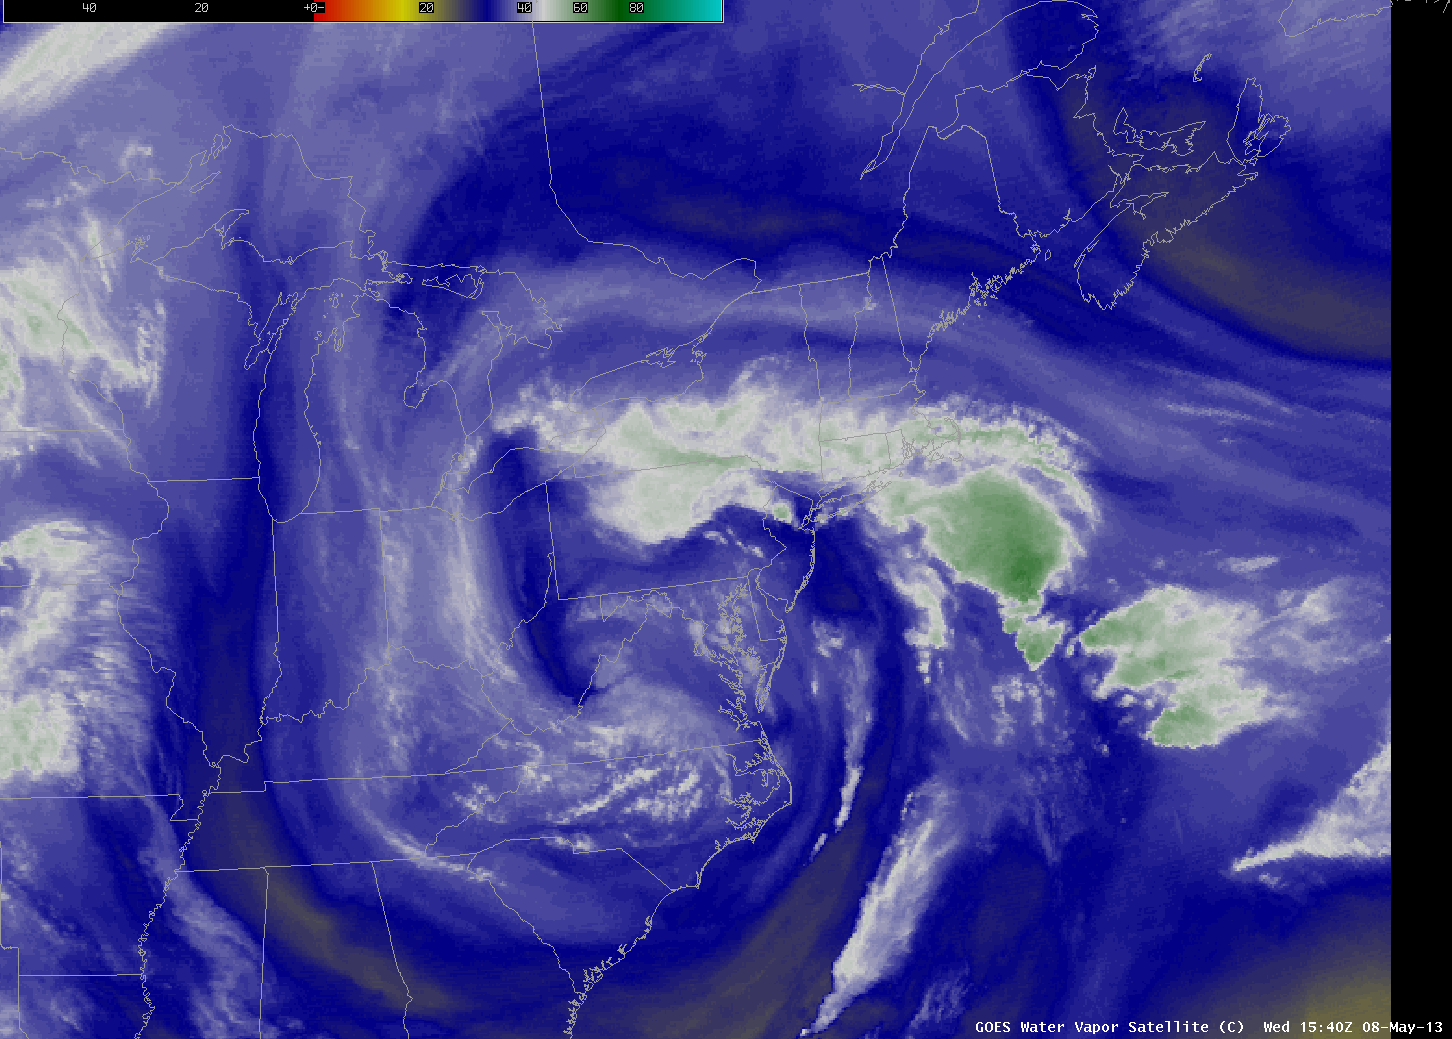 GOES-13 6.5 Âµm water vapor imagery (click image to play animation)